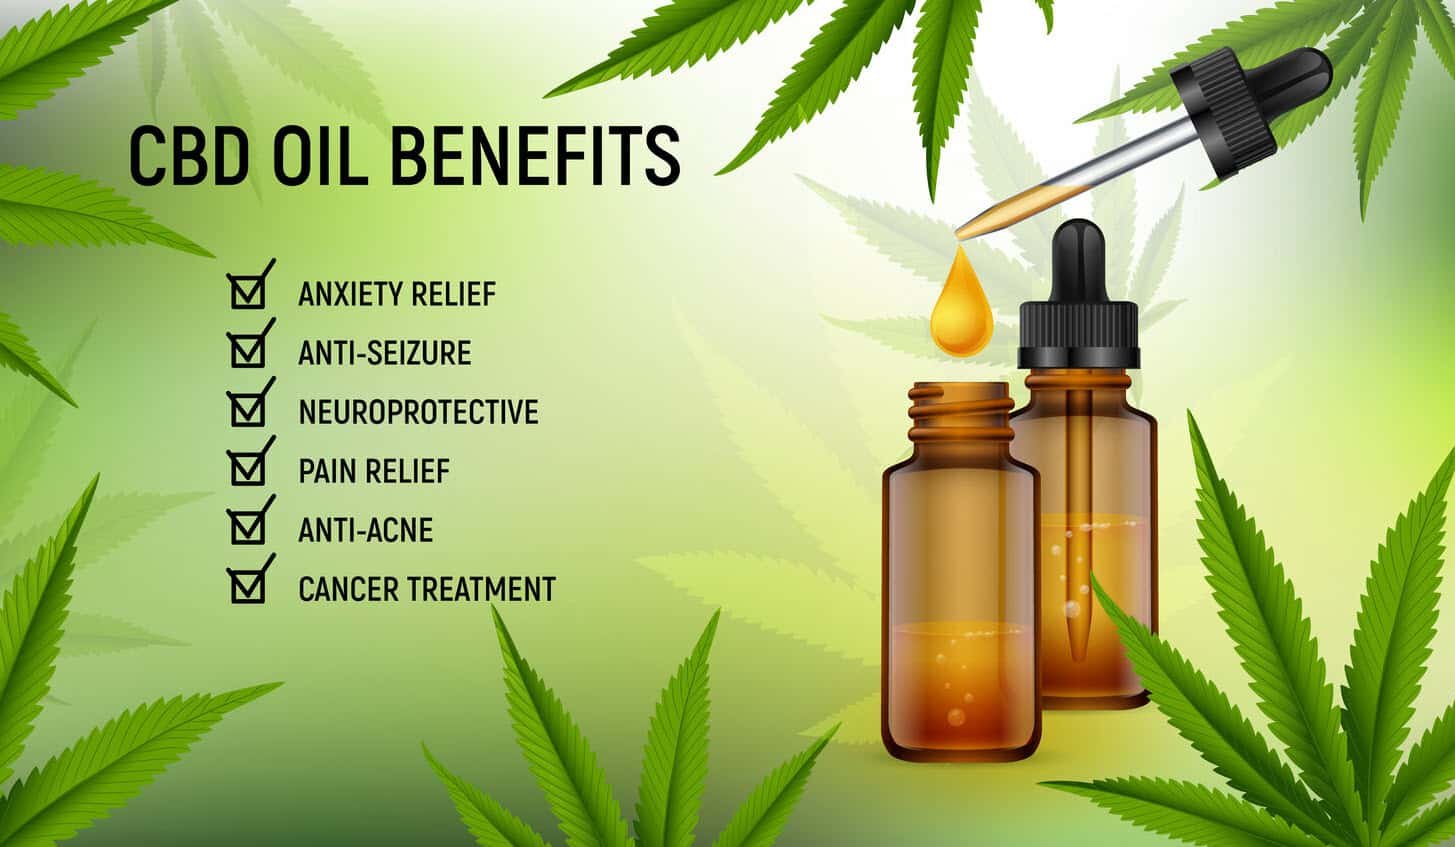 Is CBD Effective For Treating Pain